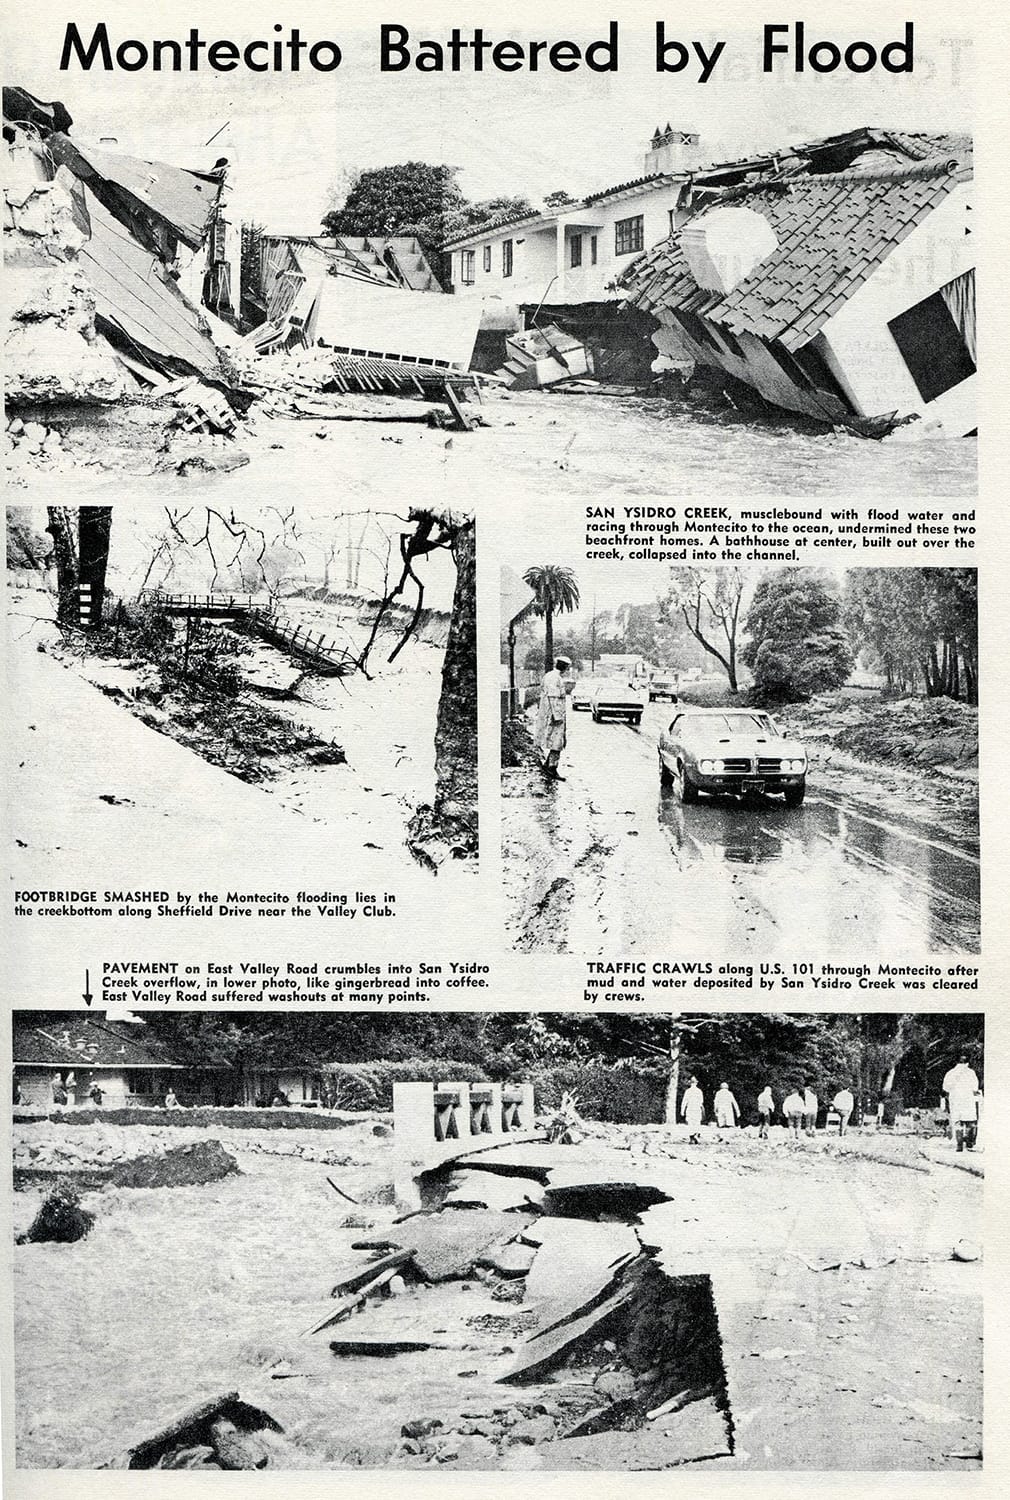 January 28, 1969 - Montecito Battered by Flood